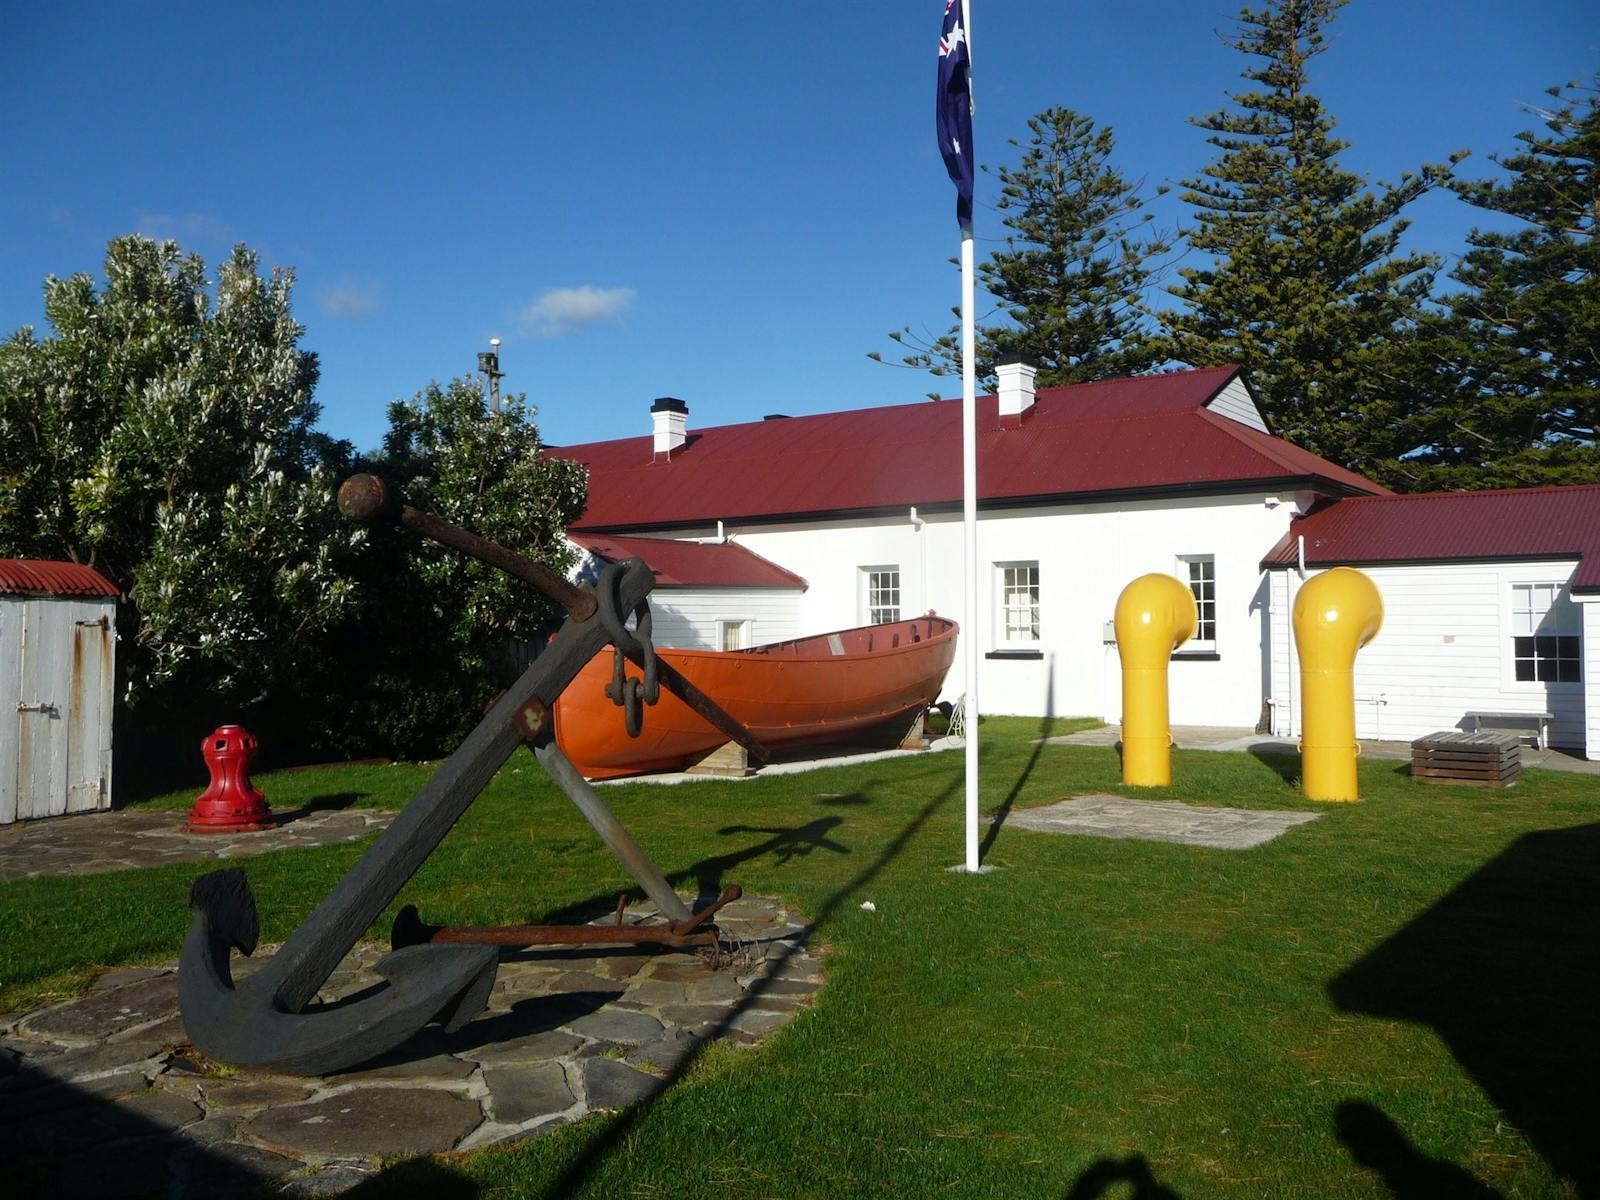 Low Head Pilot Station Maritime Museum | Things to do | Discover Tasmania